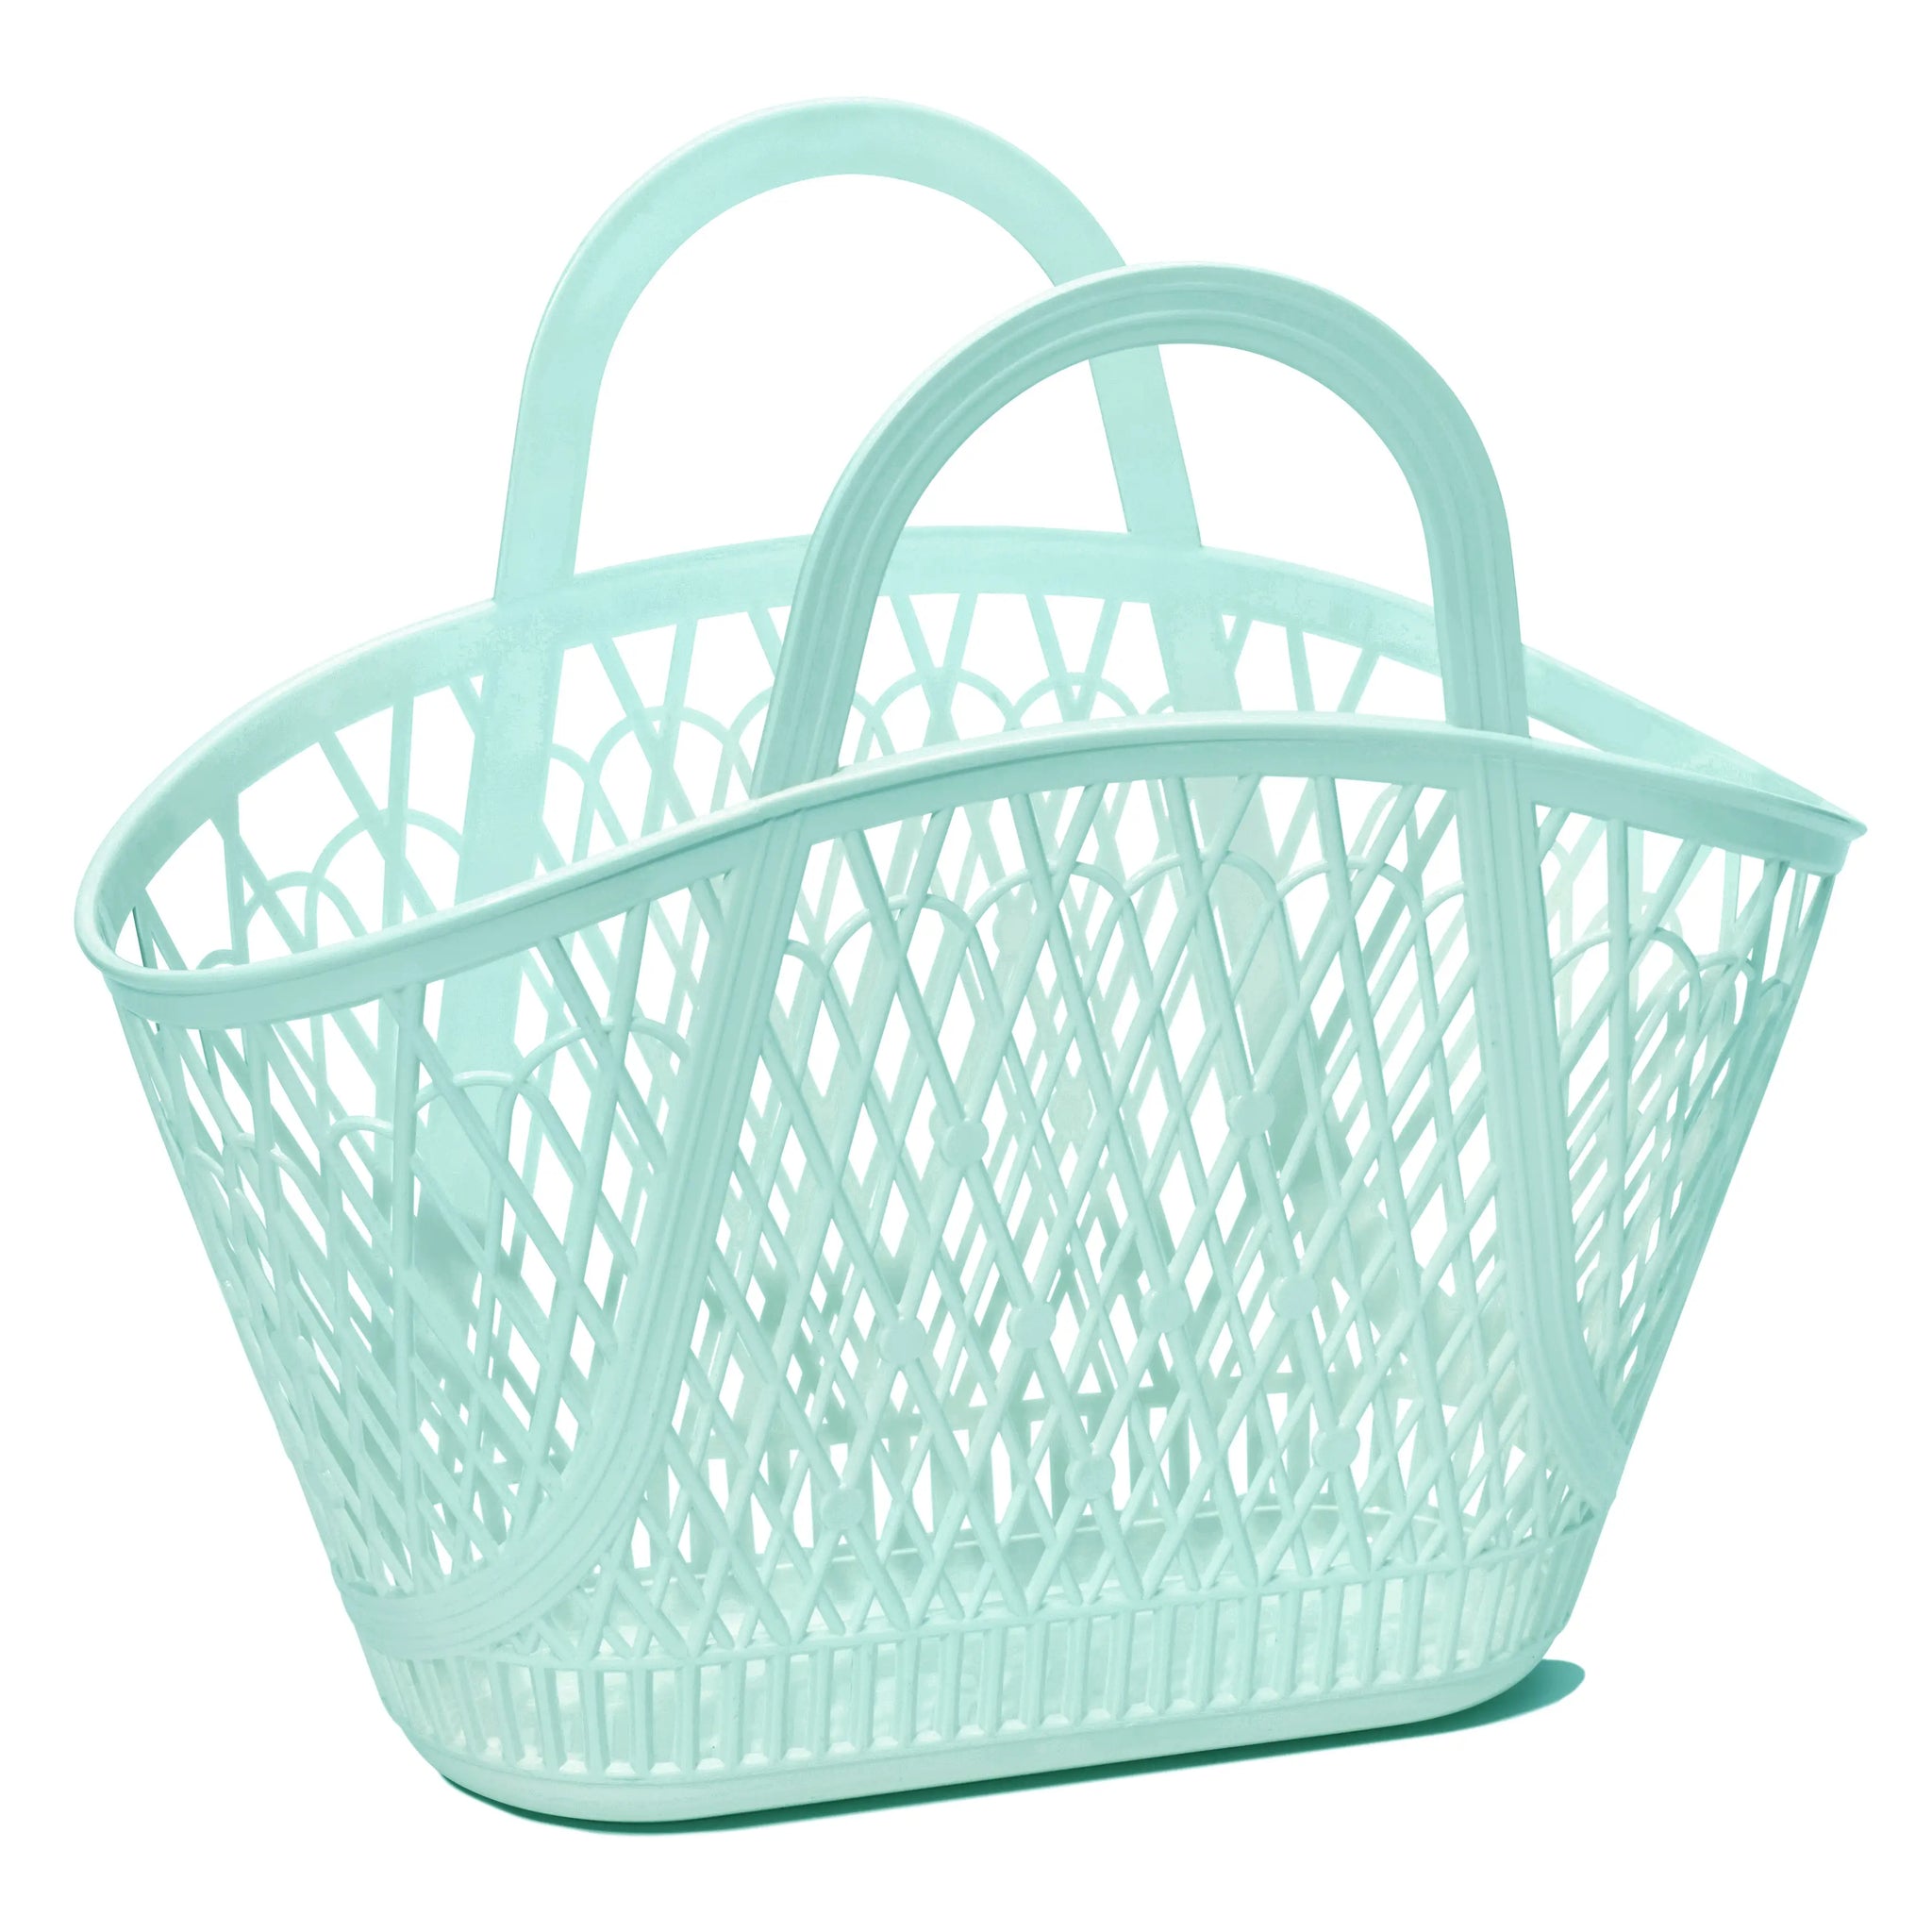 A large mint green rounded handle bag in a market basket style with a criss-cross pattern and flat base